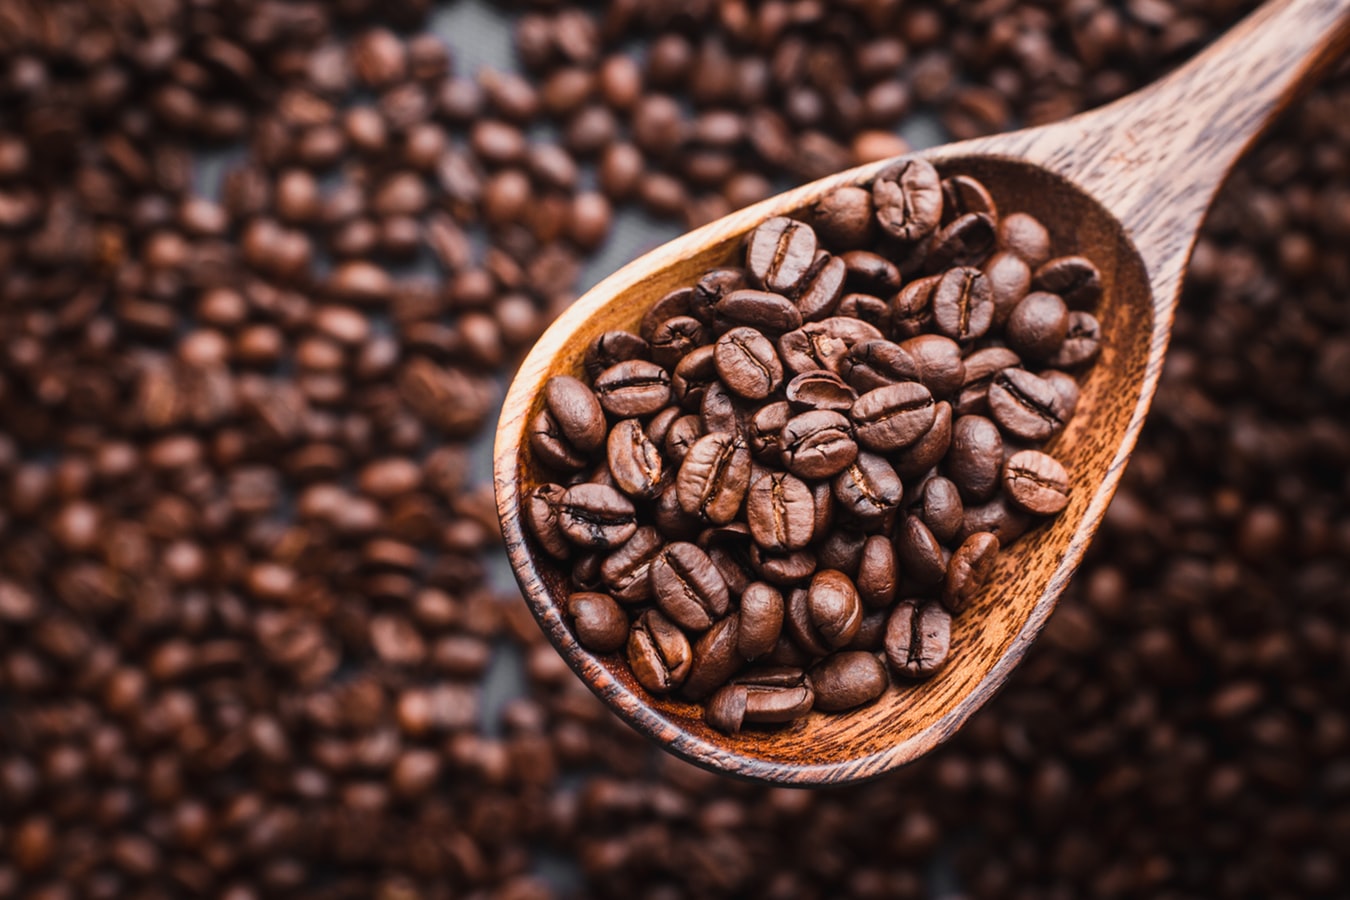 Arabica vs Robusta Coffee- What’s the Difference?